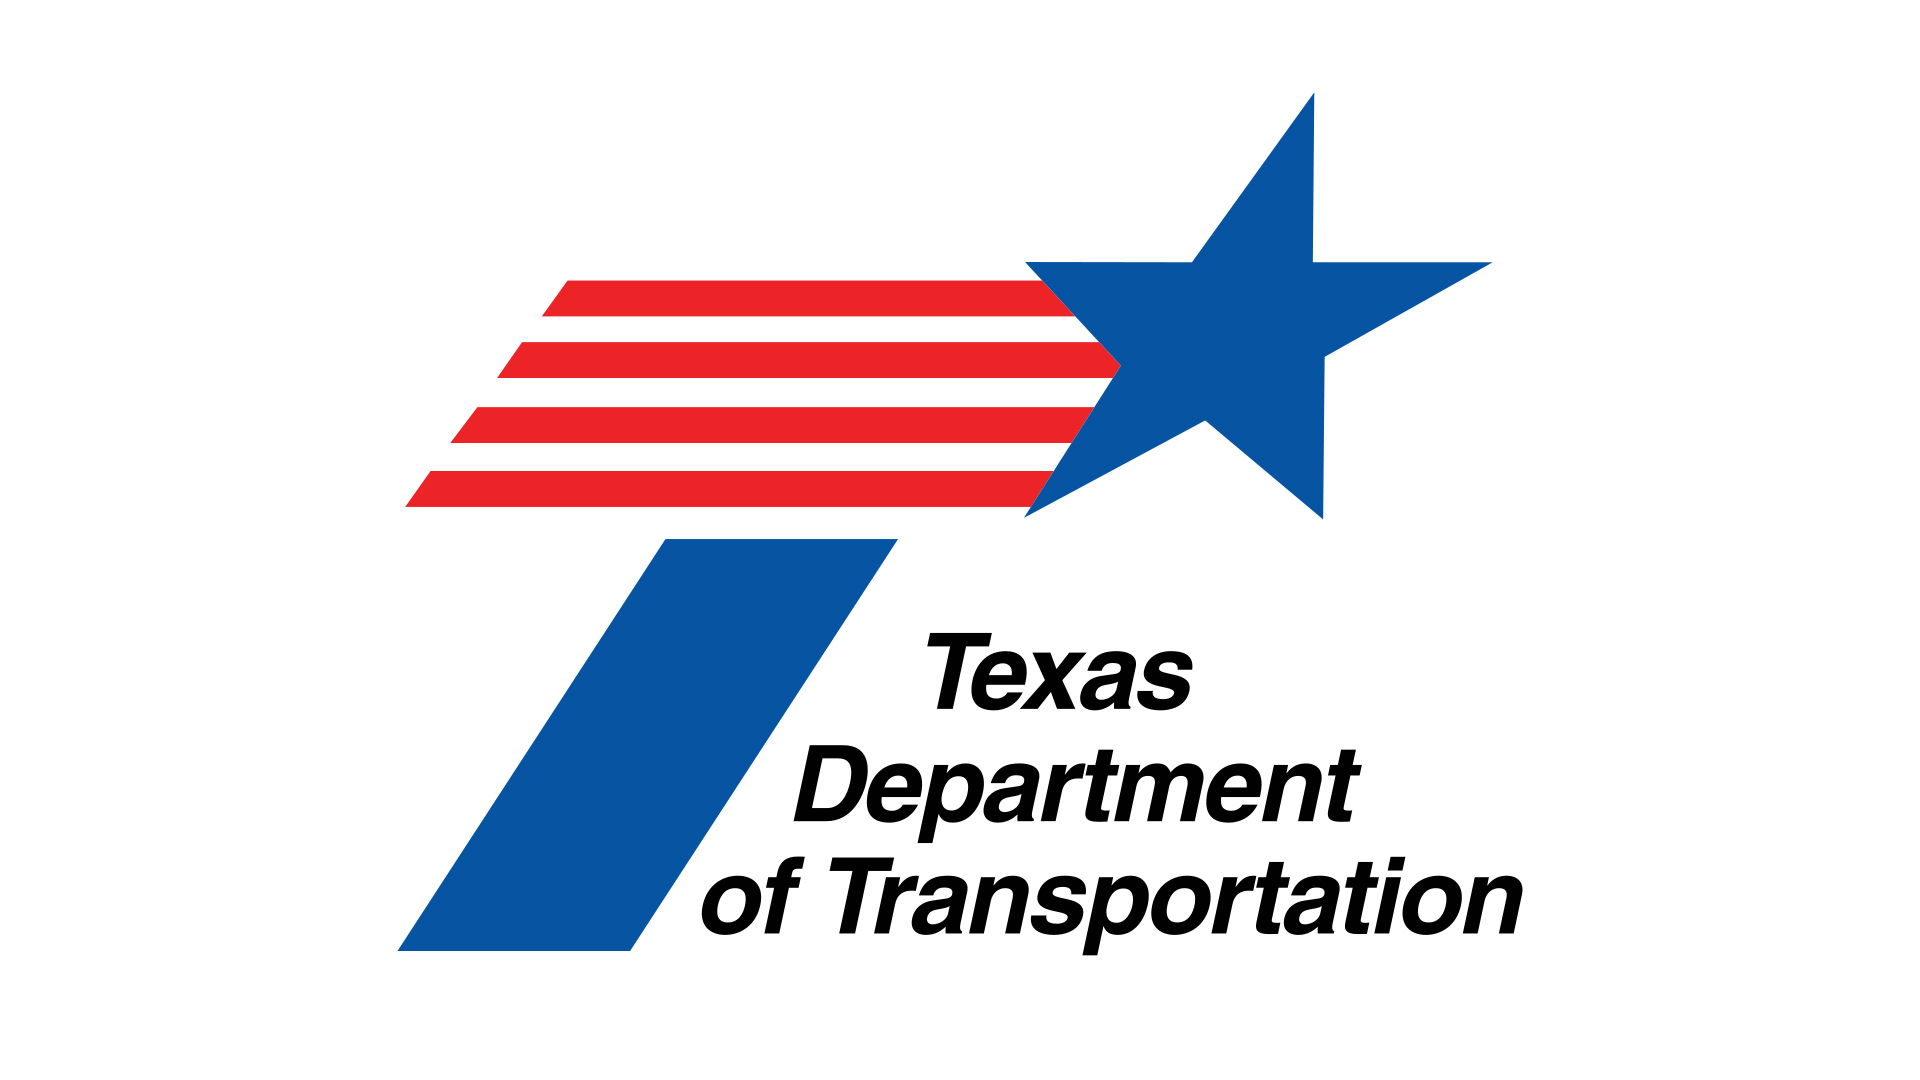 Texas Department of Transportation proposes $100B road construction plan Photo